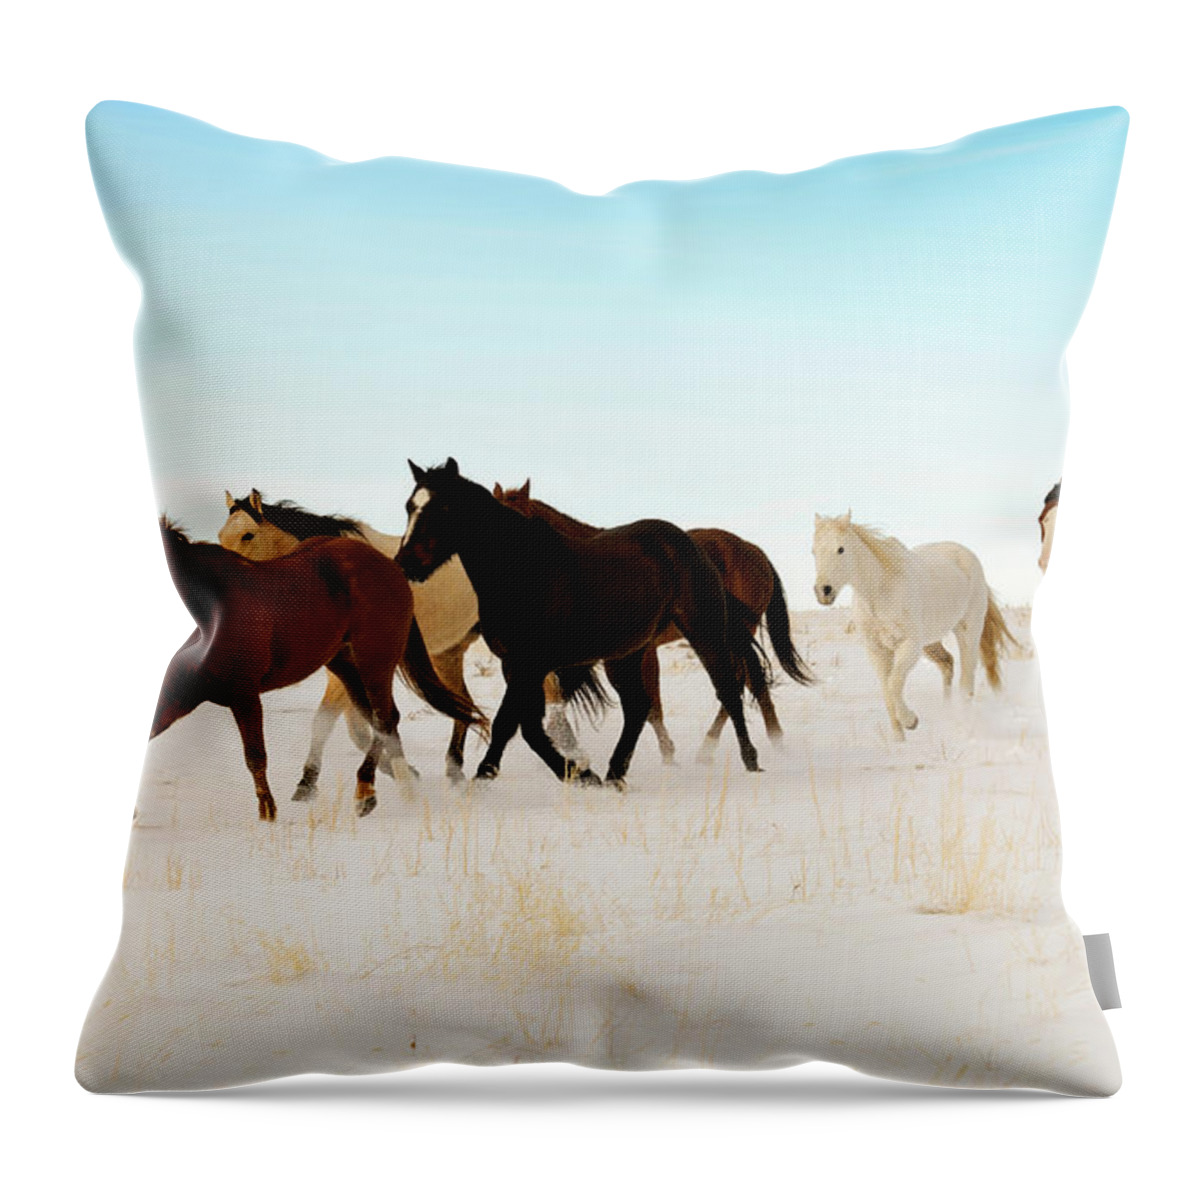 Horse Throw Pillow featuring the photograph Wild Horses Running Across A Snowy by Lifejourneys